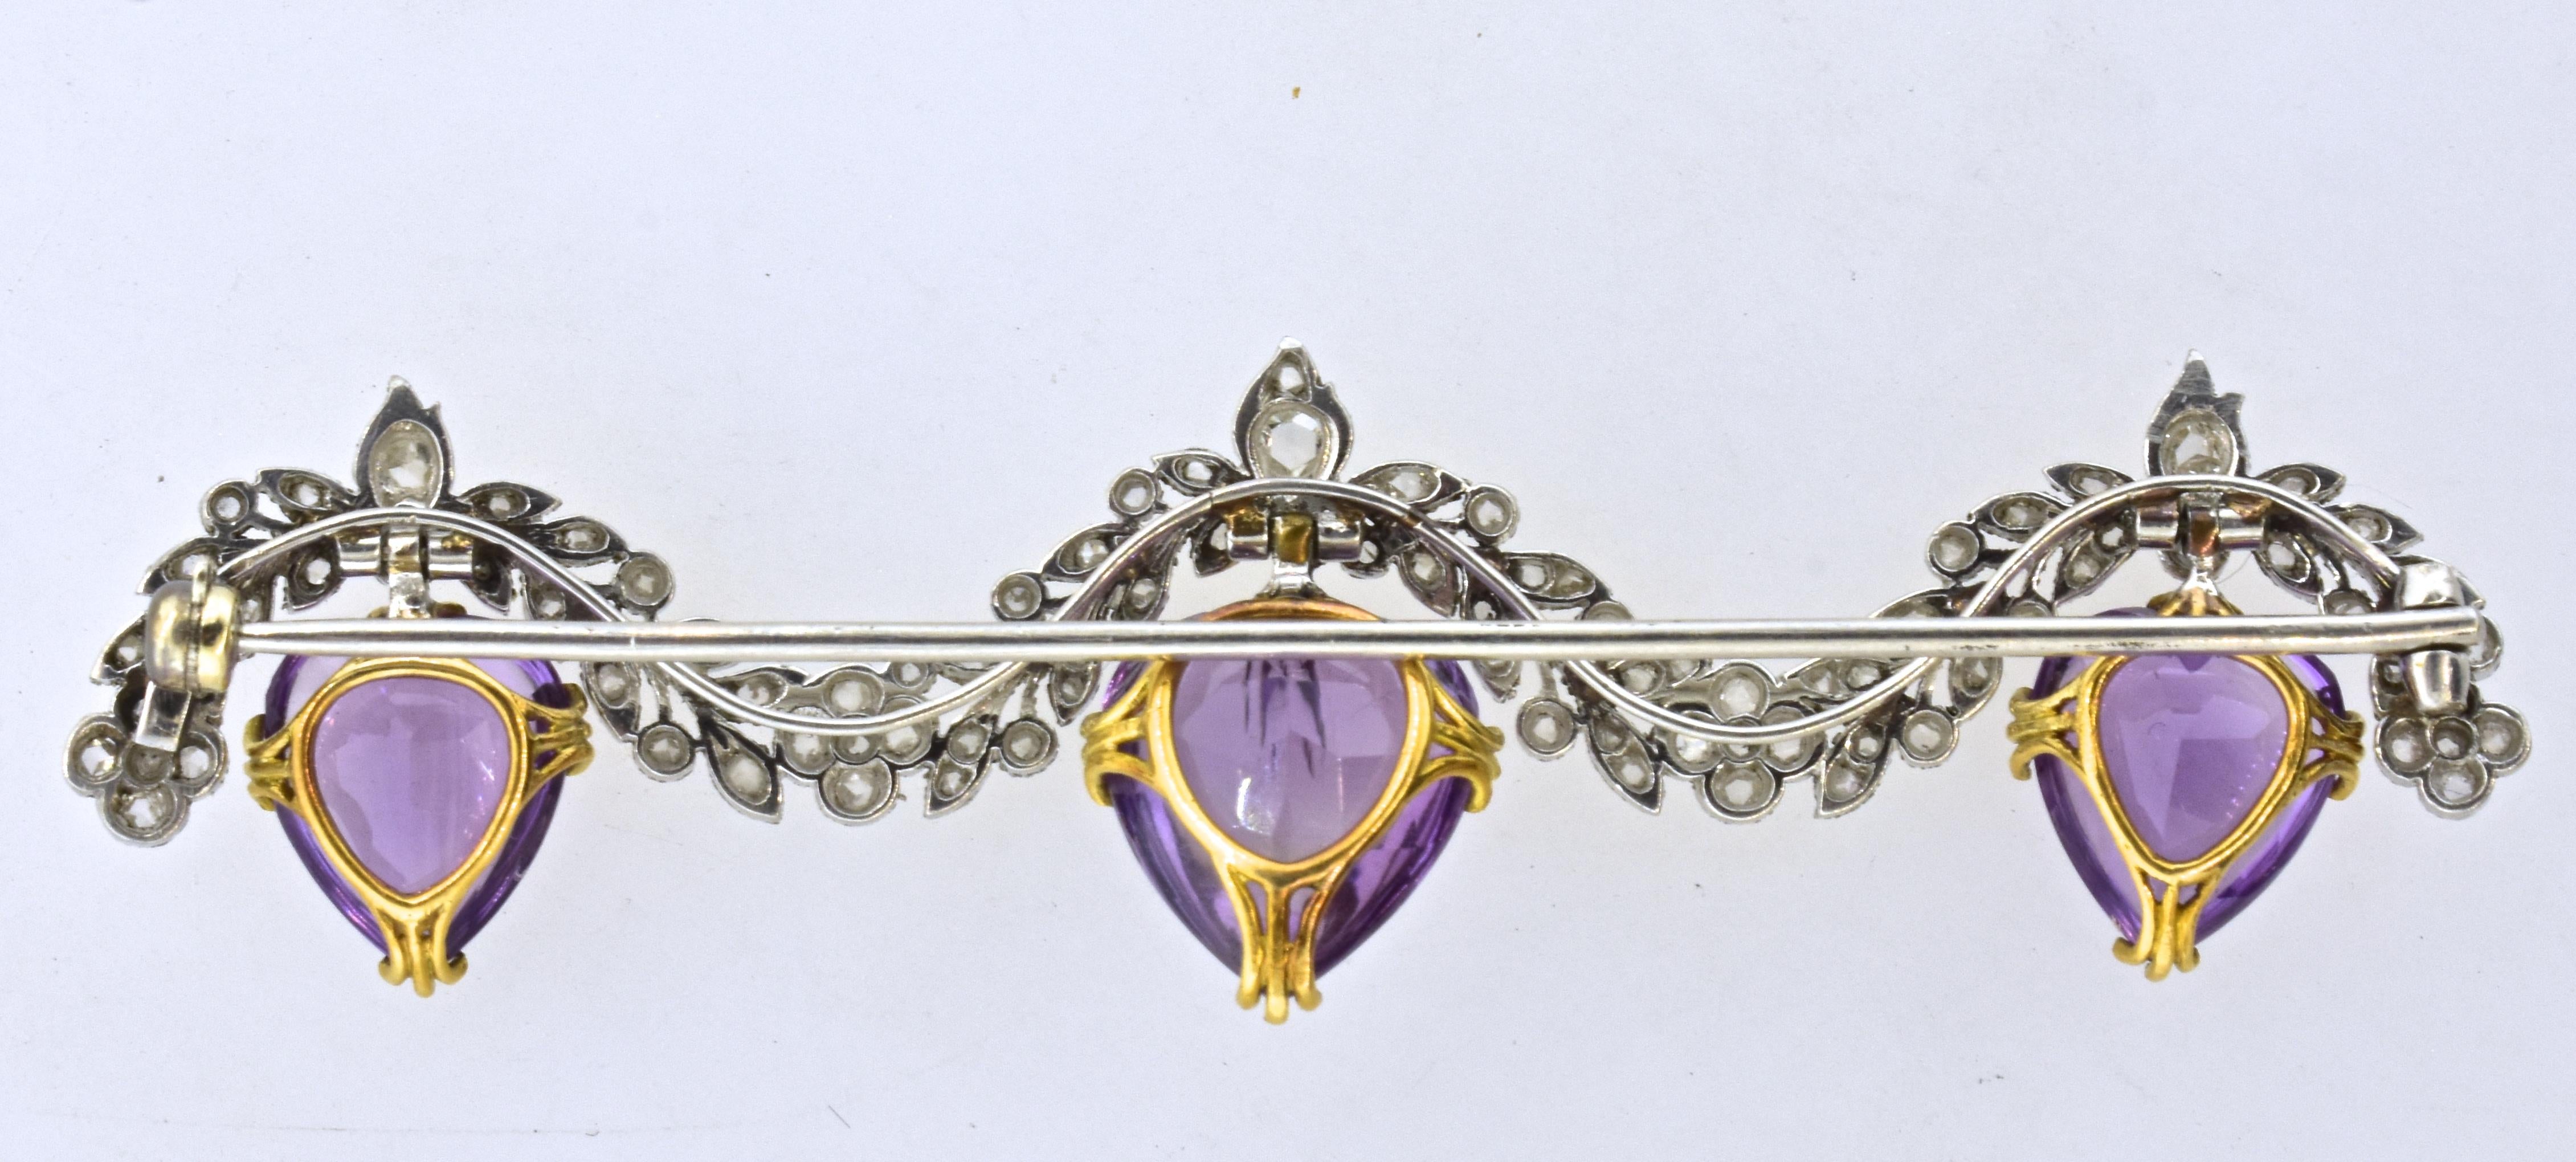 Women's or Men's Antique Amethyst Large Brooch accented with Diamond Edwardian, circa 1910